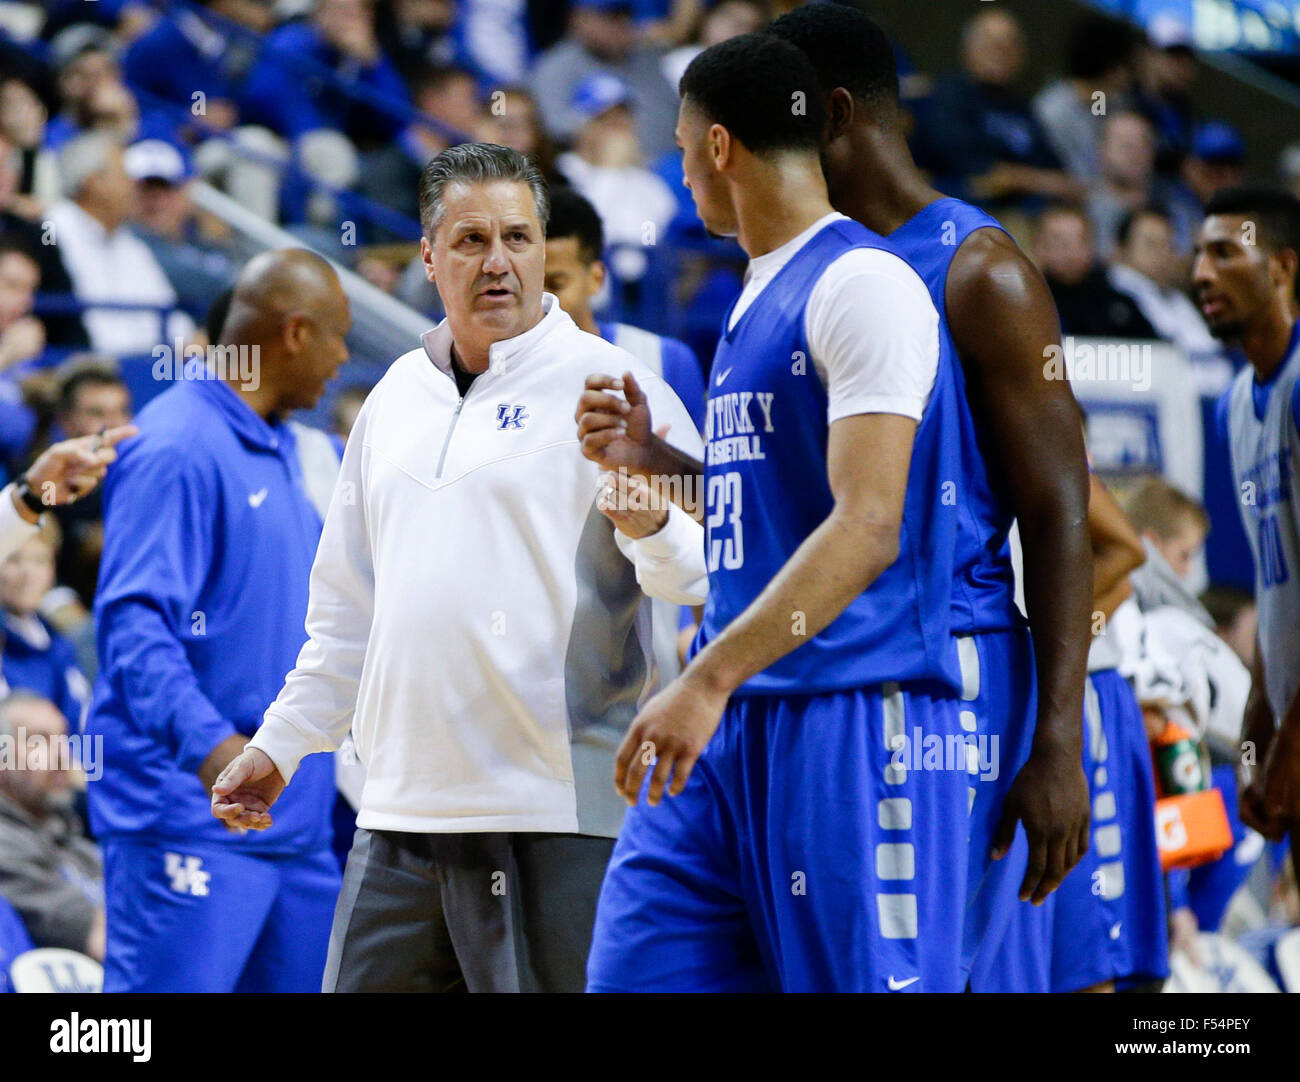 Lexington, Kentucky, USA. 13th Oct, 2015. Kentucky Wildcats head coach John Calipari chatted with Kentucky Wildcats guard Jamal Murray (23) during a time out during the Blue-White game on Tuesday October 27, 2015 in Lexington, KY. Photo by Mark Cornelison | Staff © Lexington Herald-Leader/ZUMA Wire/Alamy Live News Stock Photo